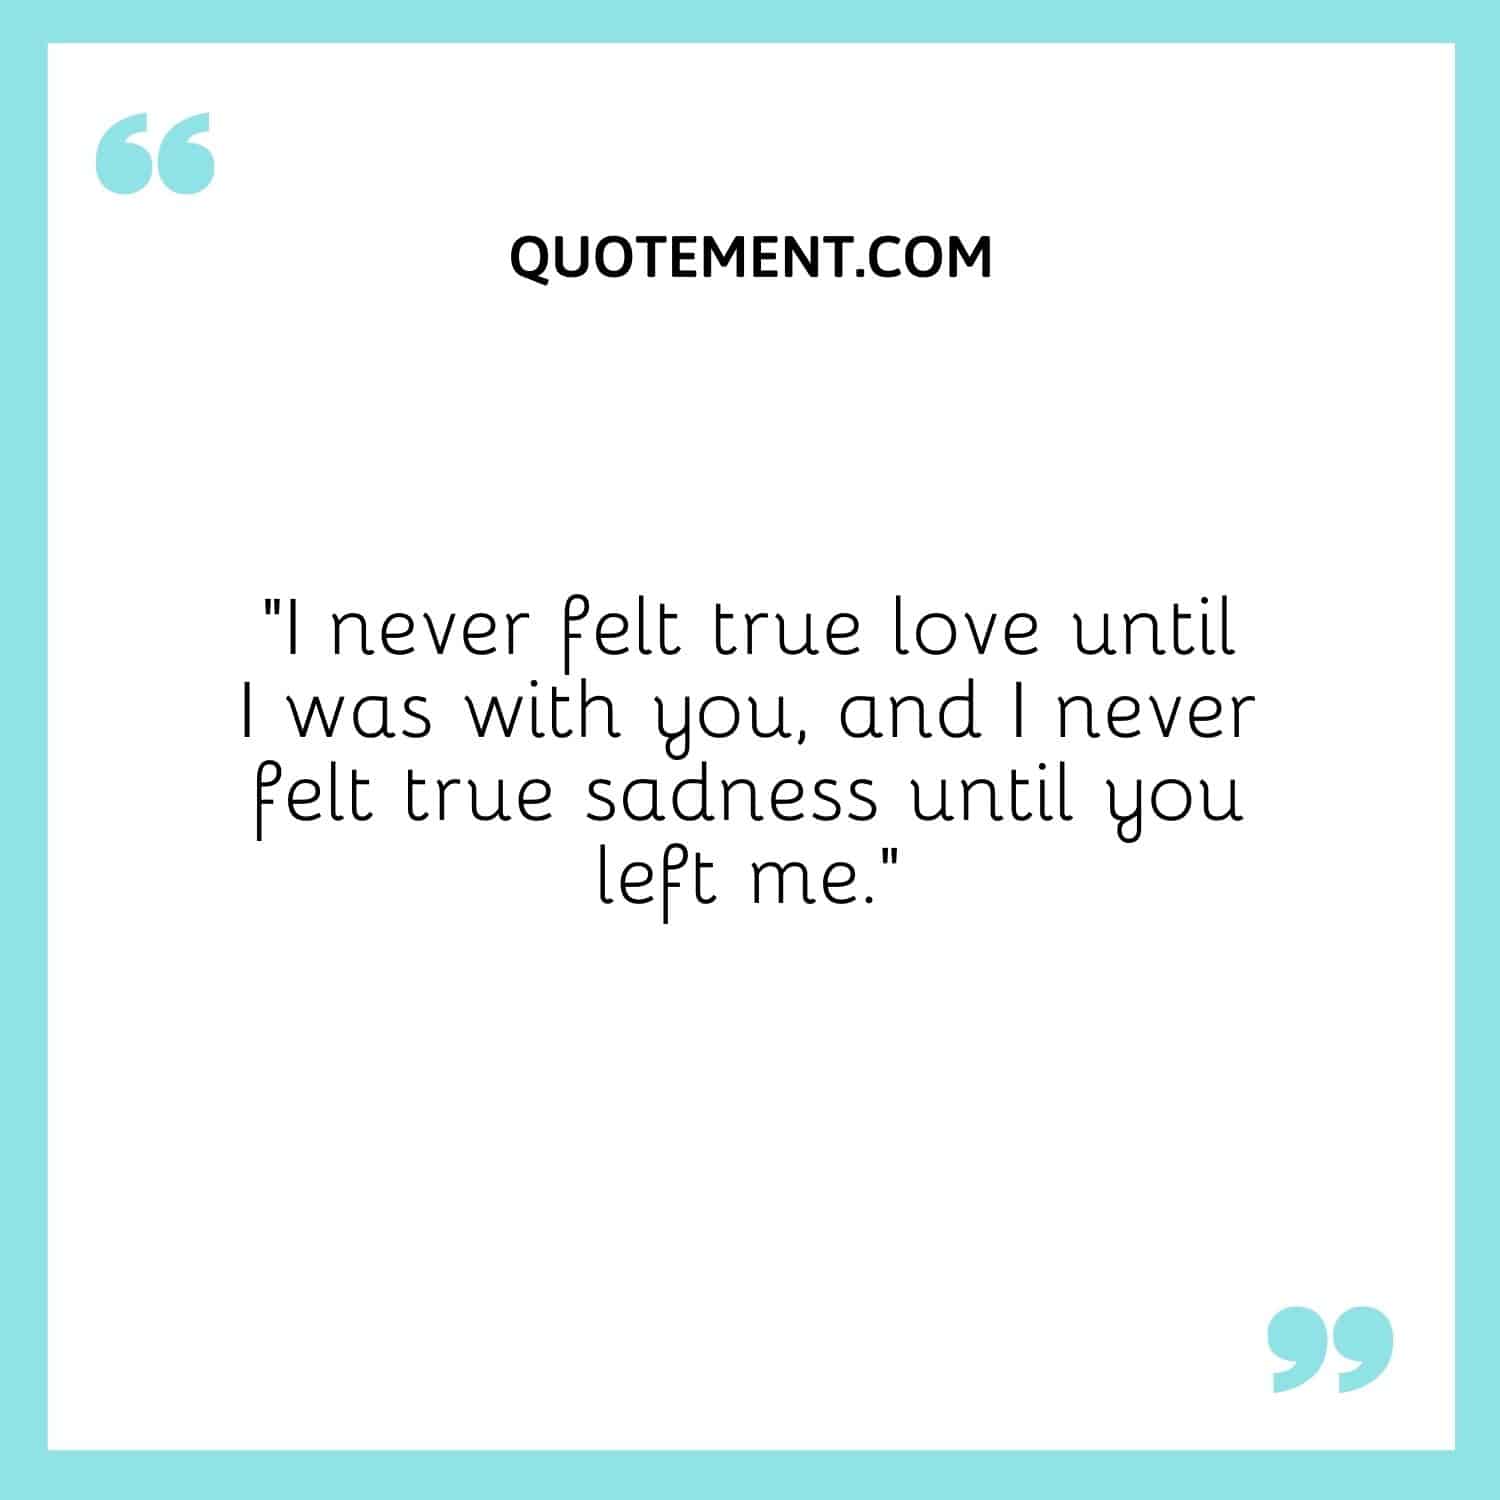 I never felt true love until I was with you